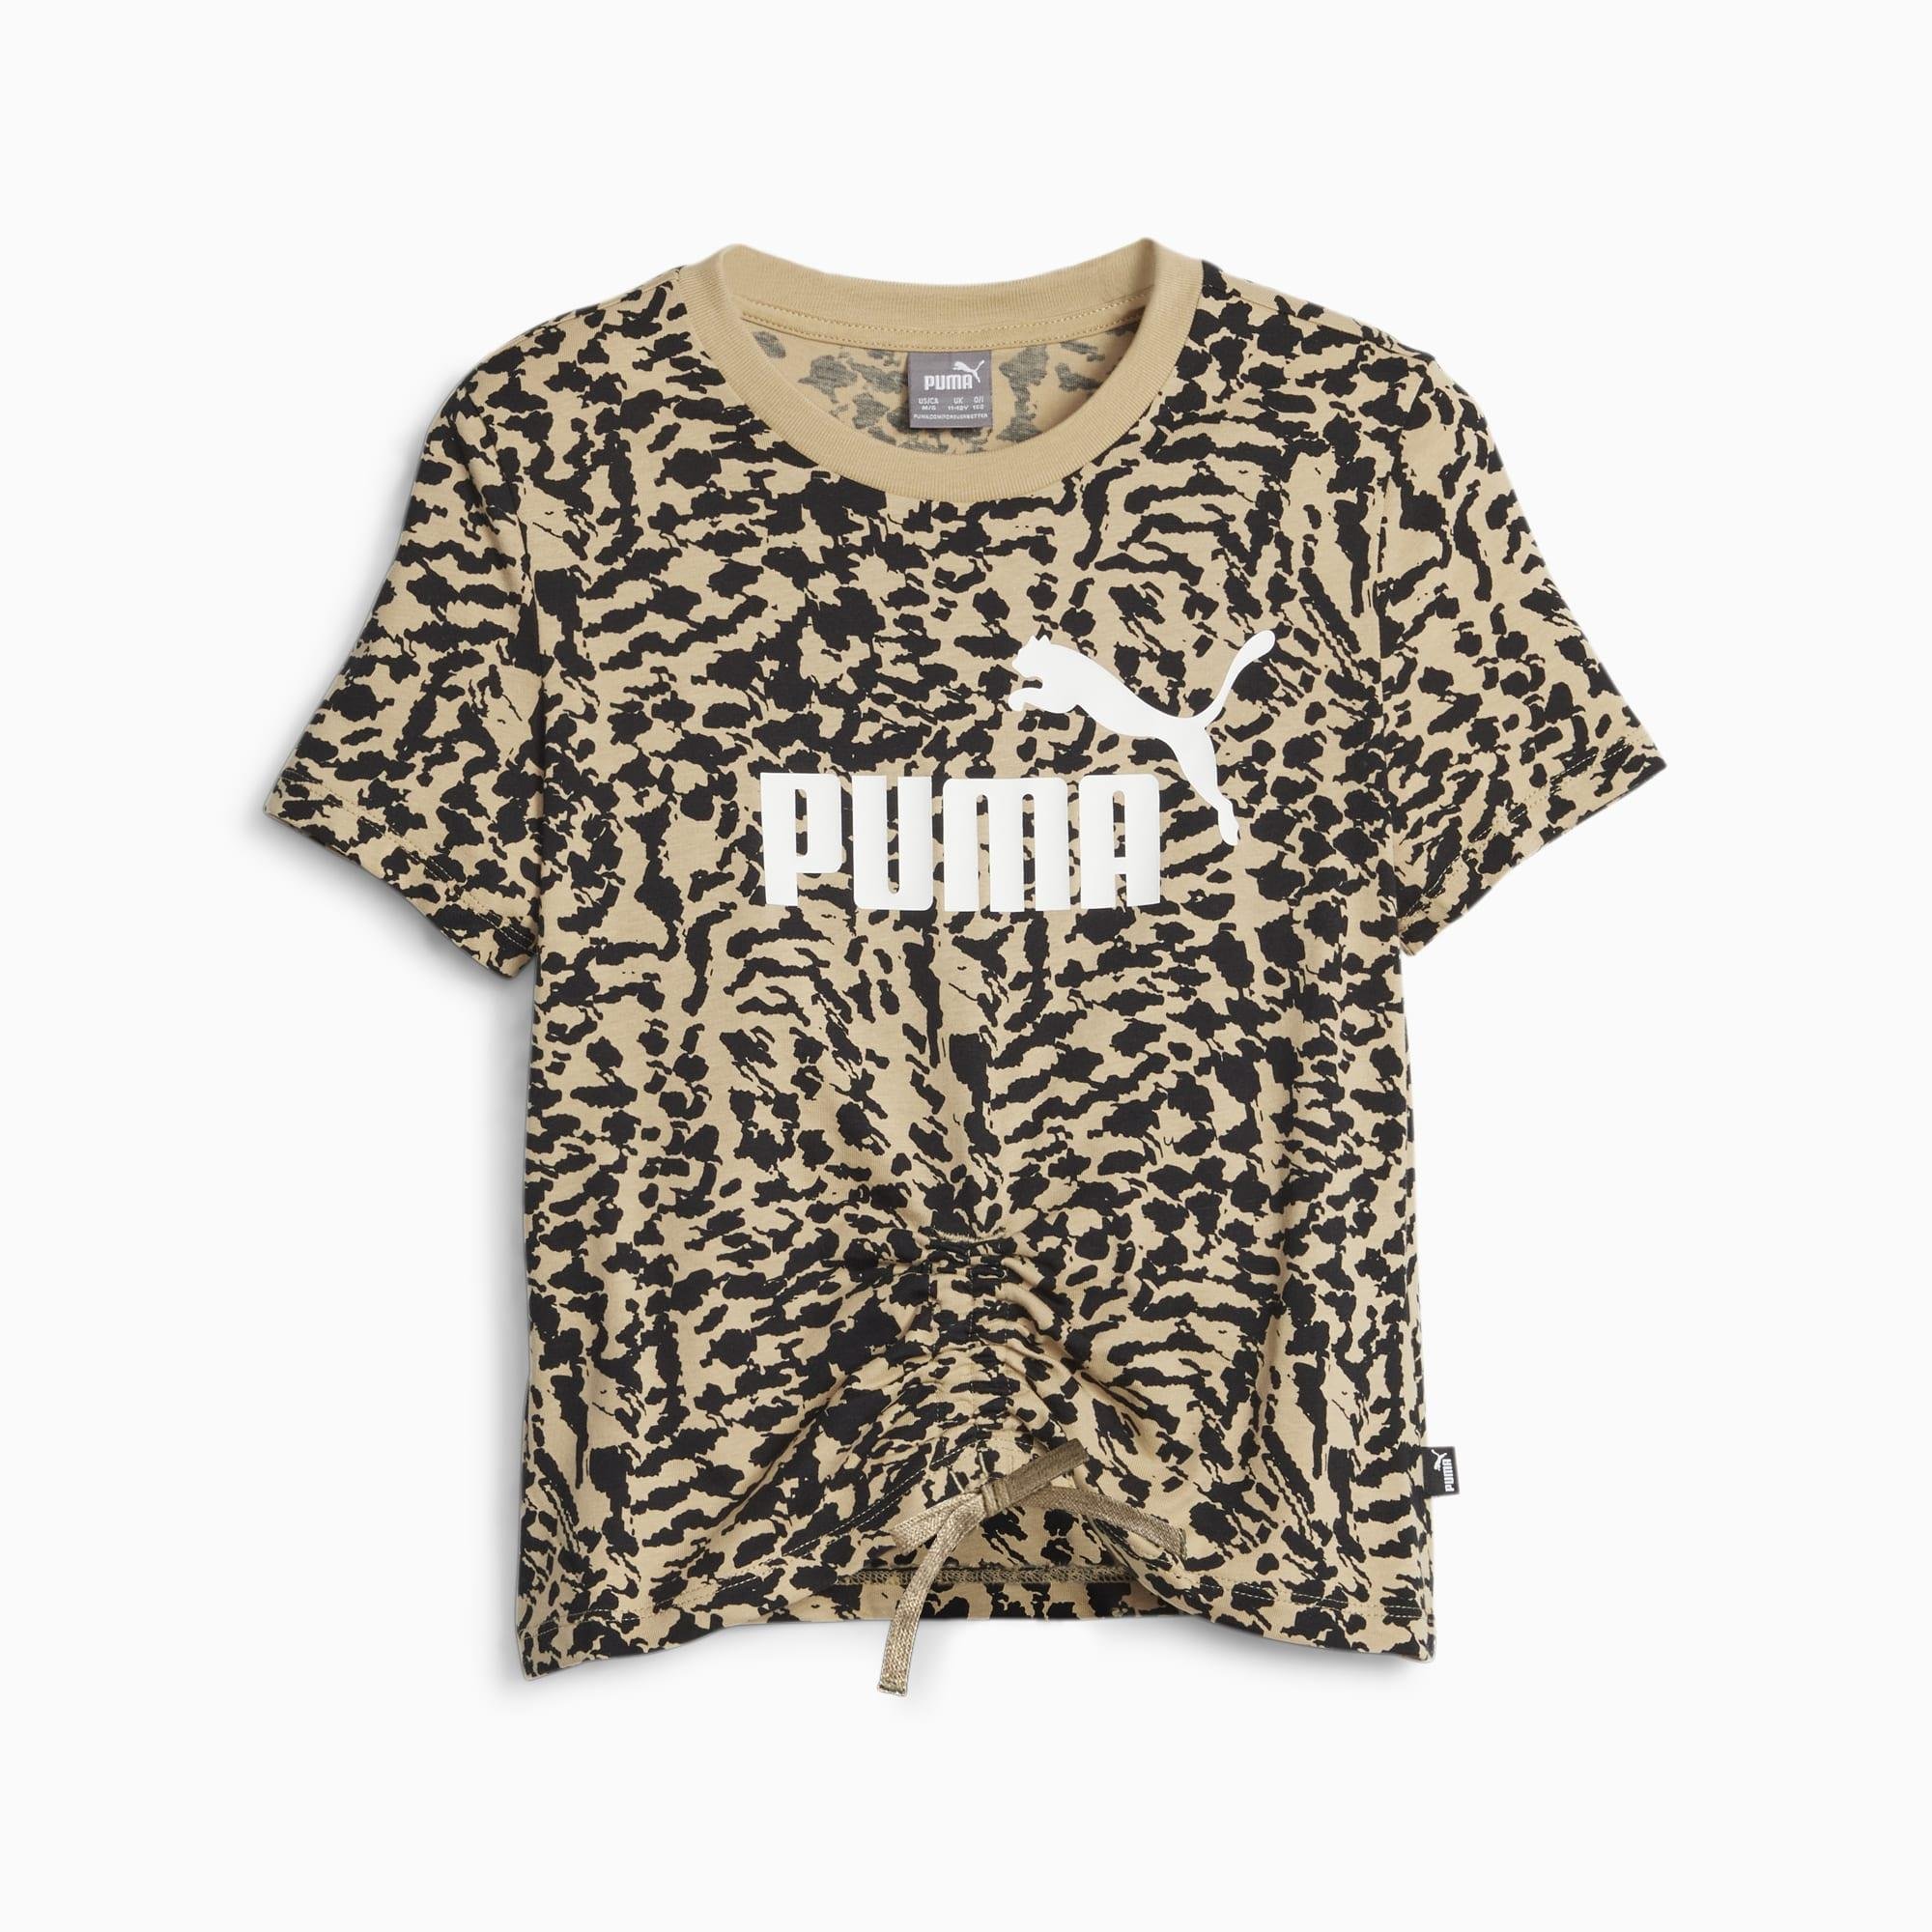 Essentials+ Animal Girls' Knotted Tee by PUMA